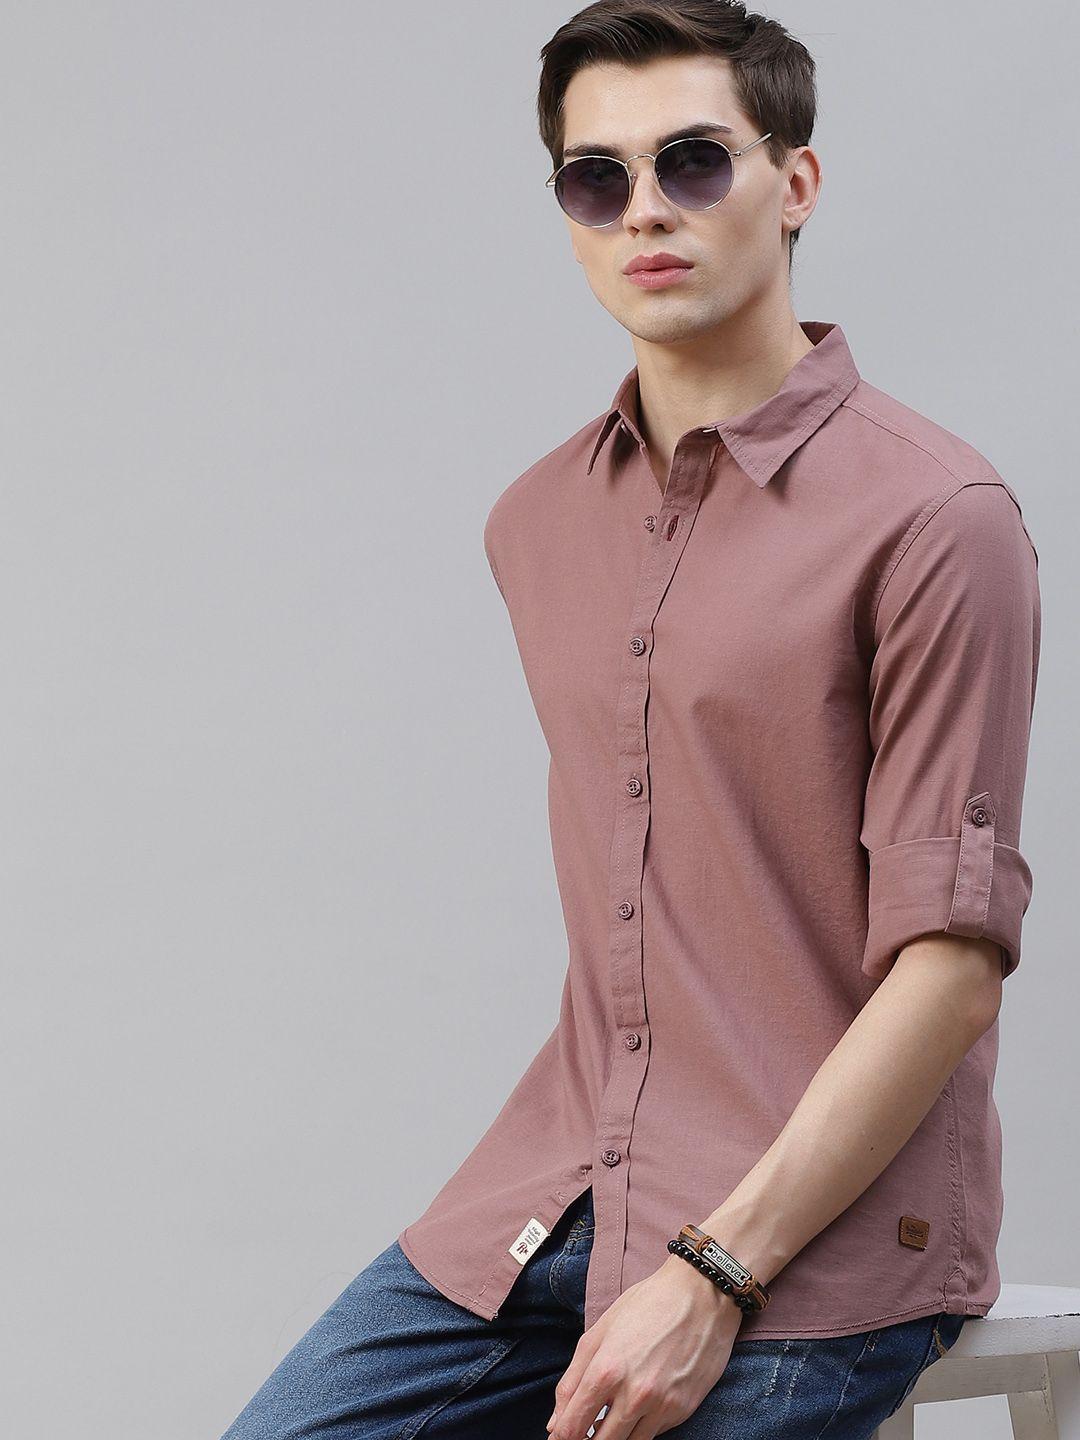 the-roadster-lifestyle-co-men-mauve-solid-pure-cotton-regular-fit-sustainable-casual-shirt